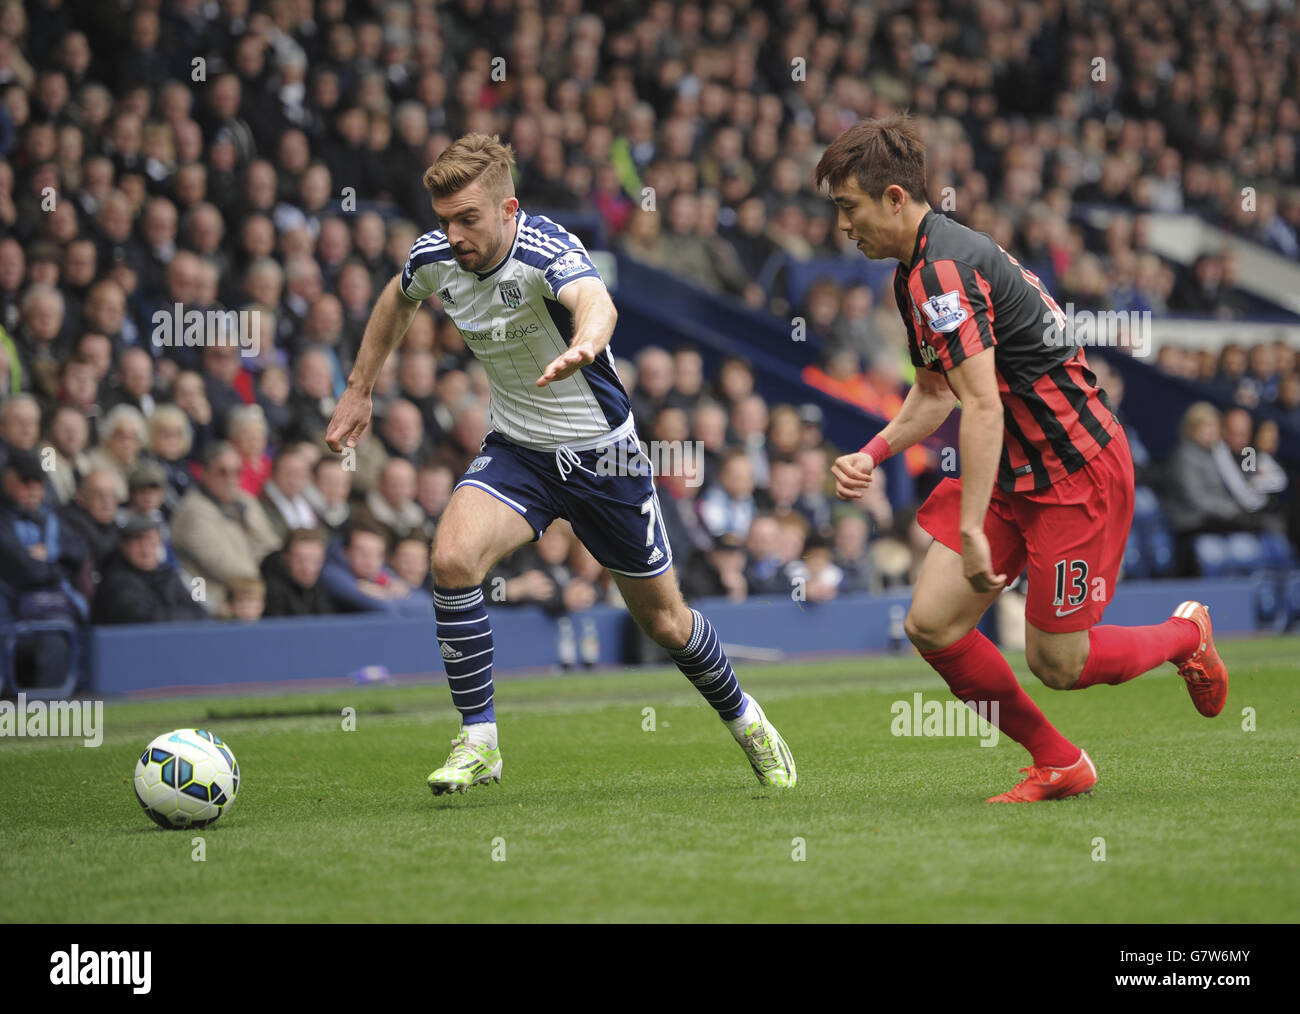 West Bromwich Albion 's James Morrison is challenged by QPR's Yun Suk-Young during the Barclays Premier League match at The Hawthorns, West Bromwich. PRESS ASSOCIATION Photo. Picture date: Saturday April 4, 2015. See PA story SOCCER West Brom. Photo credit should read: Jon Buckle/PA Wire. Stock Photo